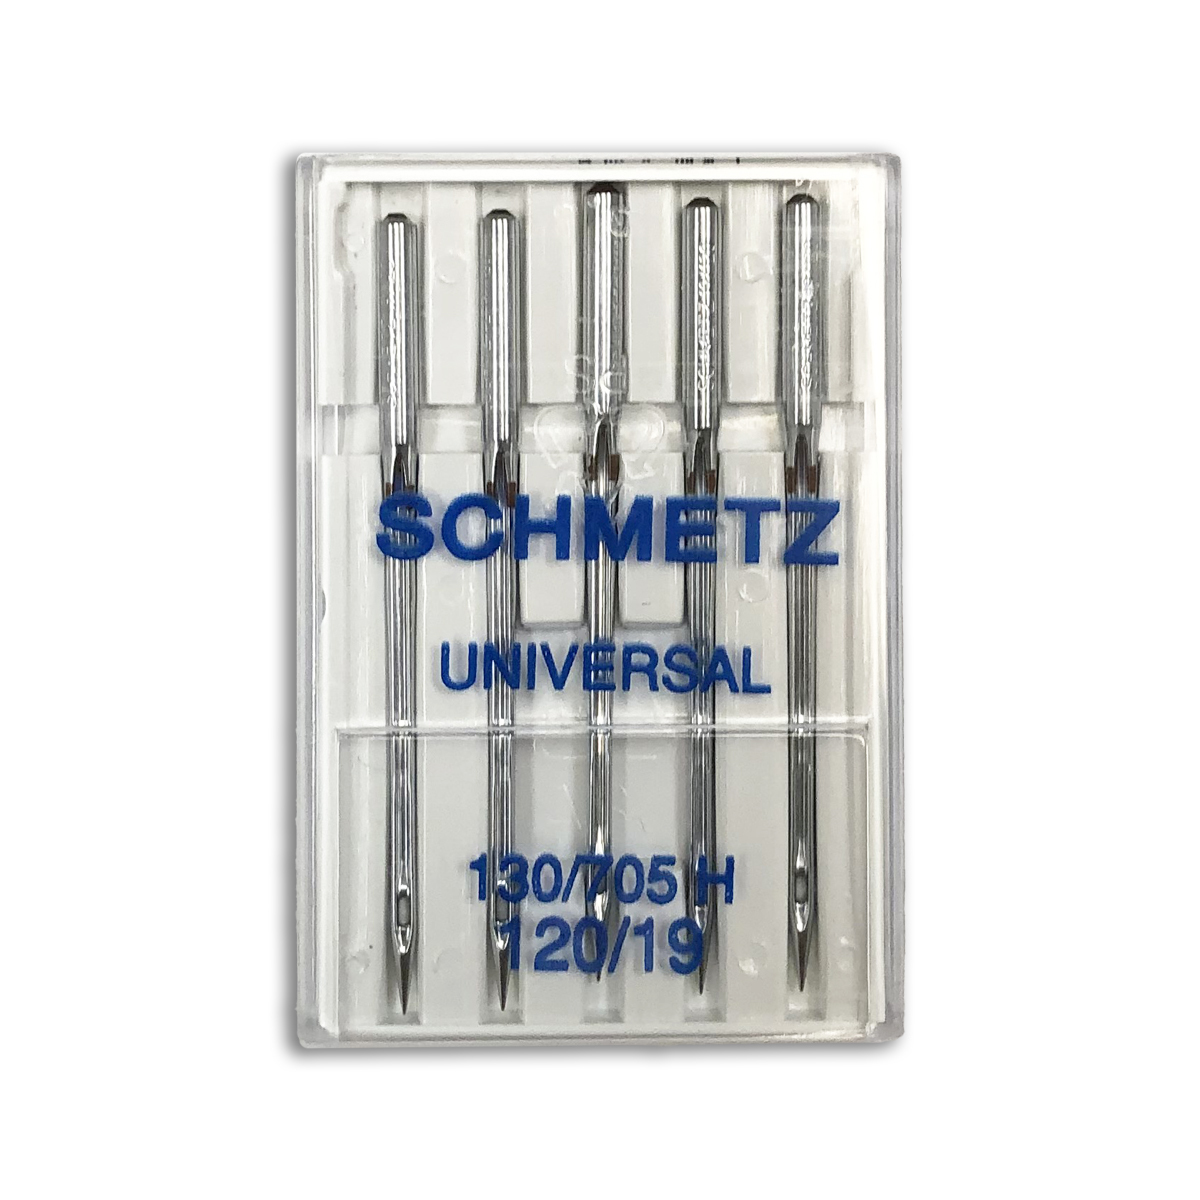 Schmetz Universal Needle Combo Pack of 10 For Sewing Machine Needle System  130/705H